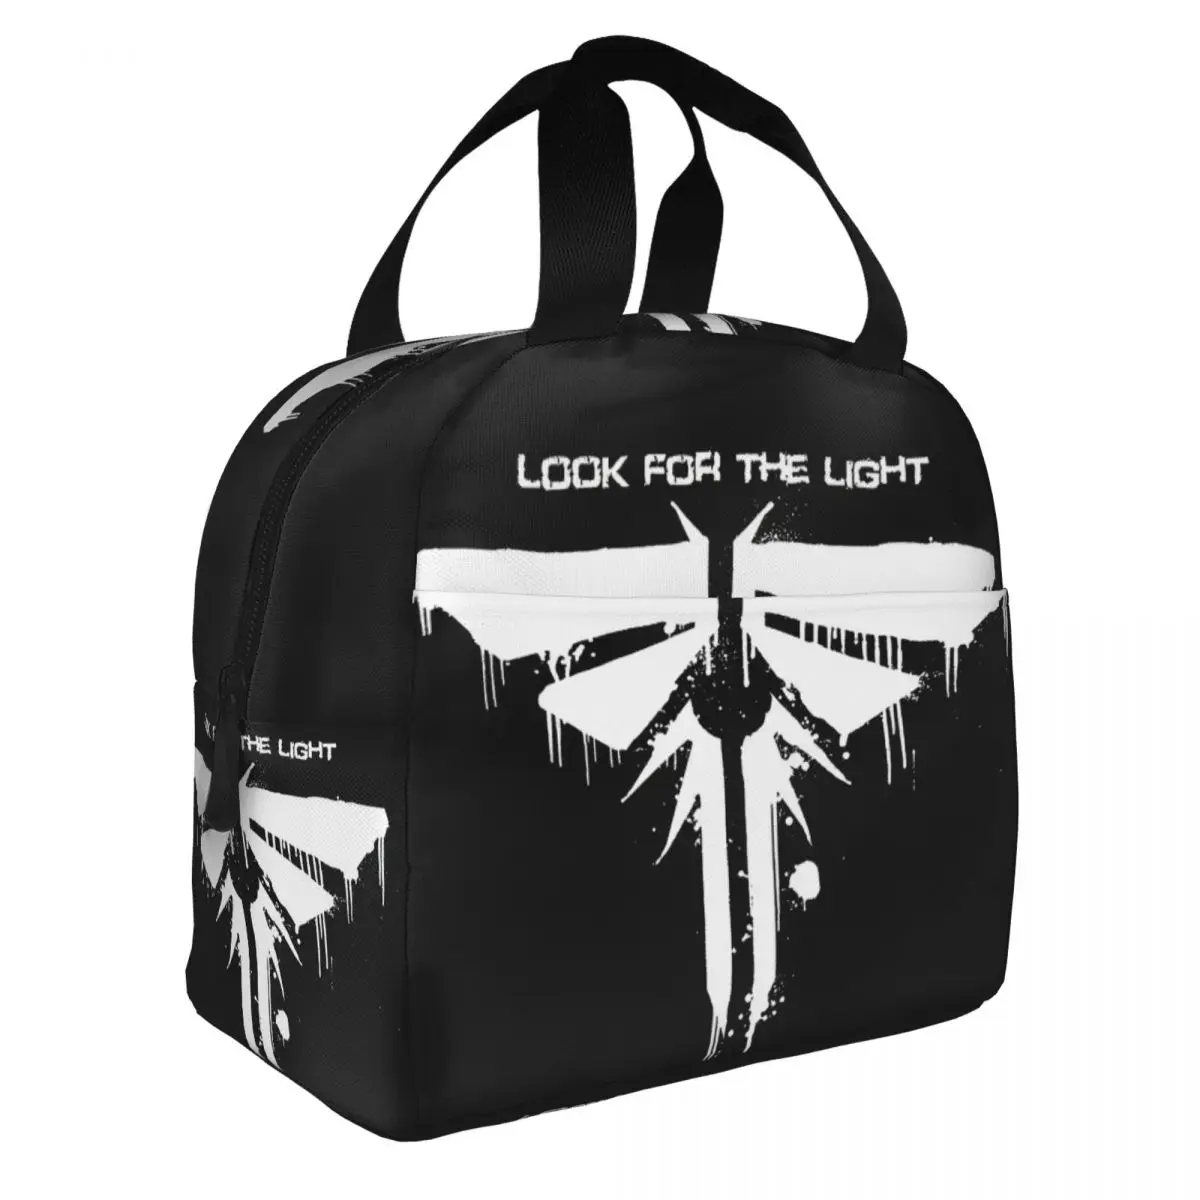 The Last Of Us Lunch Bento Bags Portable Aluminum Foil thickened Thermal Cloth Lunch Bag for Women Men Boy